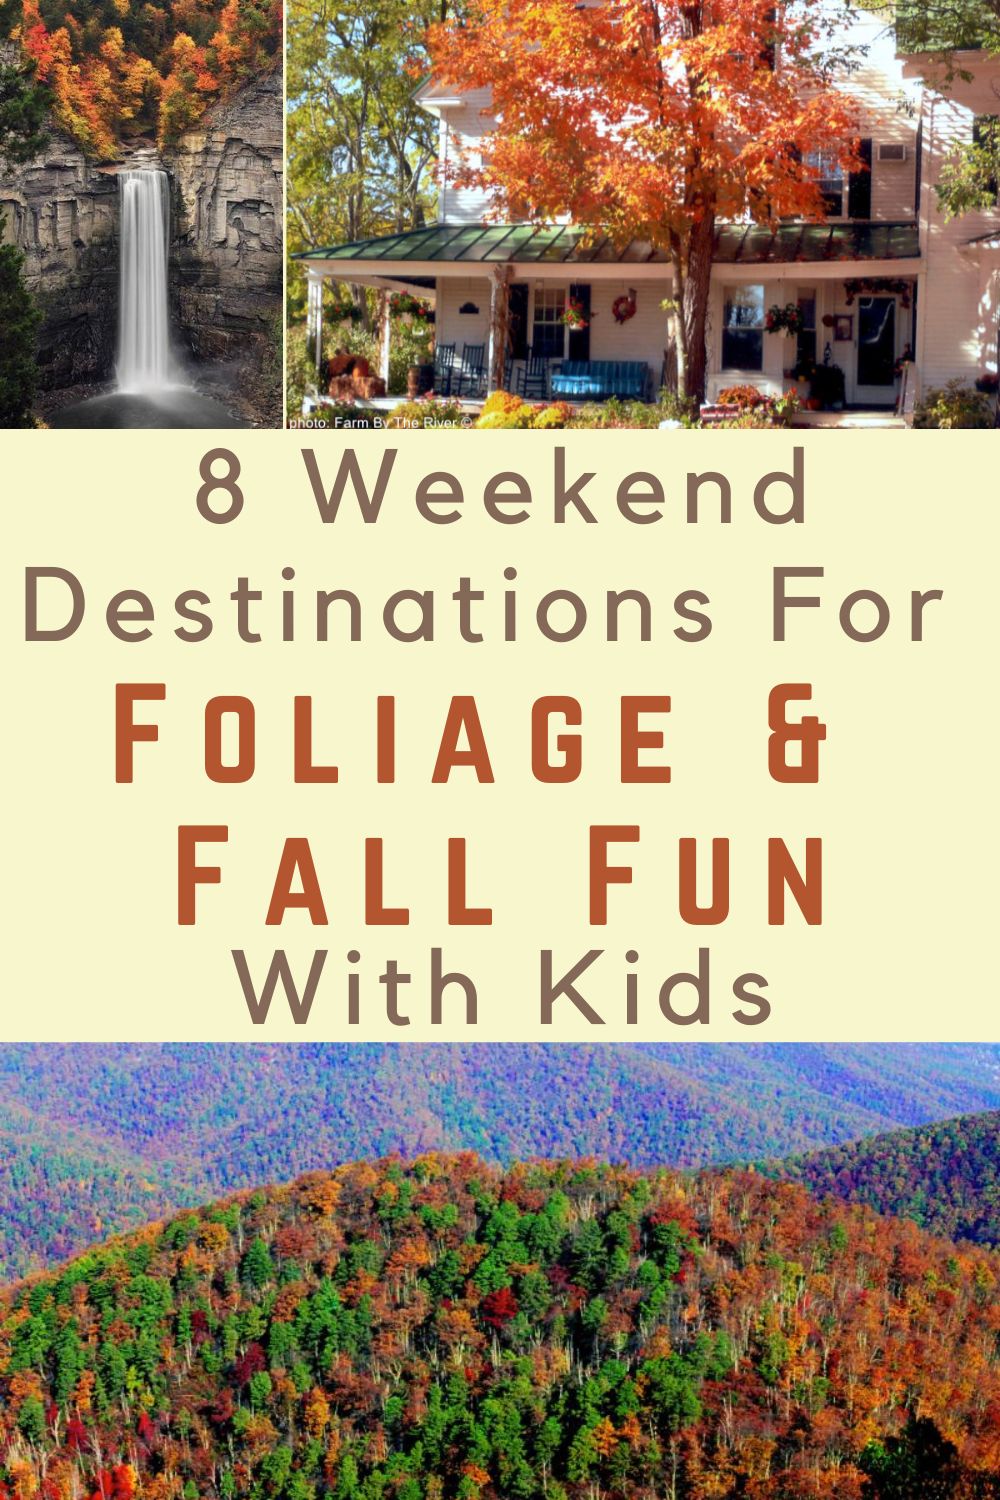 8 east coast destinations for dazzling fall foliage and seasonal activities the kids will love. plus 8 hotels and inns to make your getaway truly memorable.